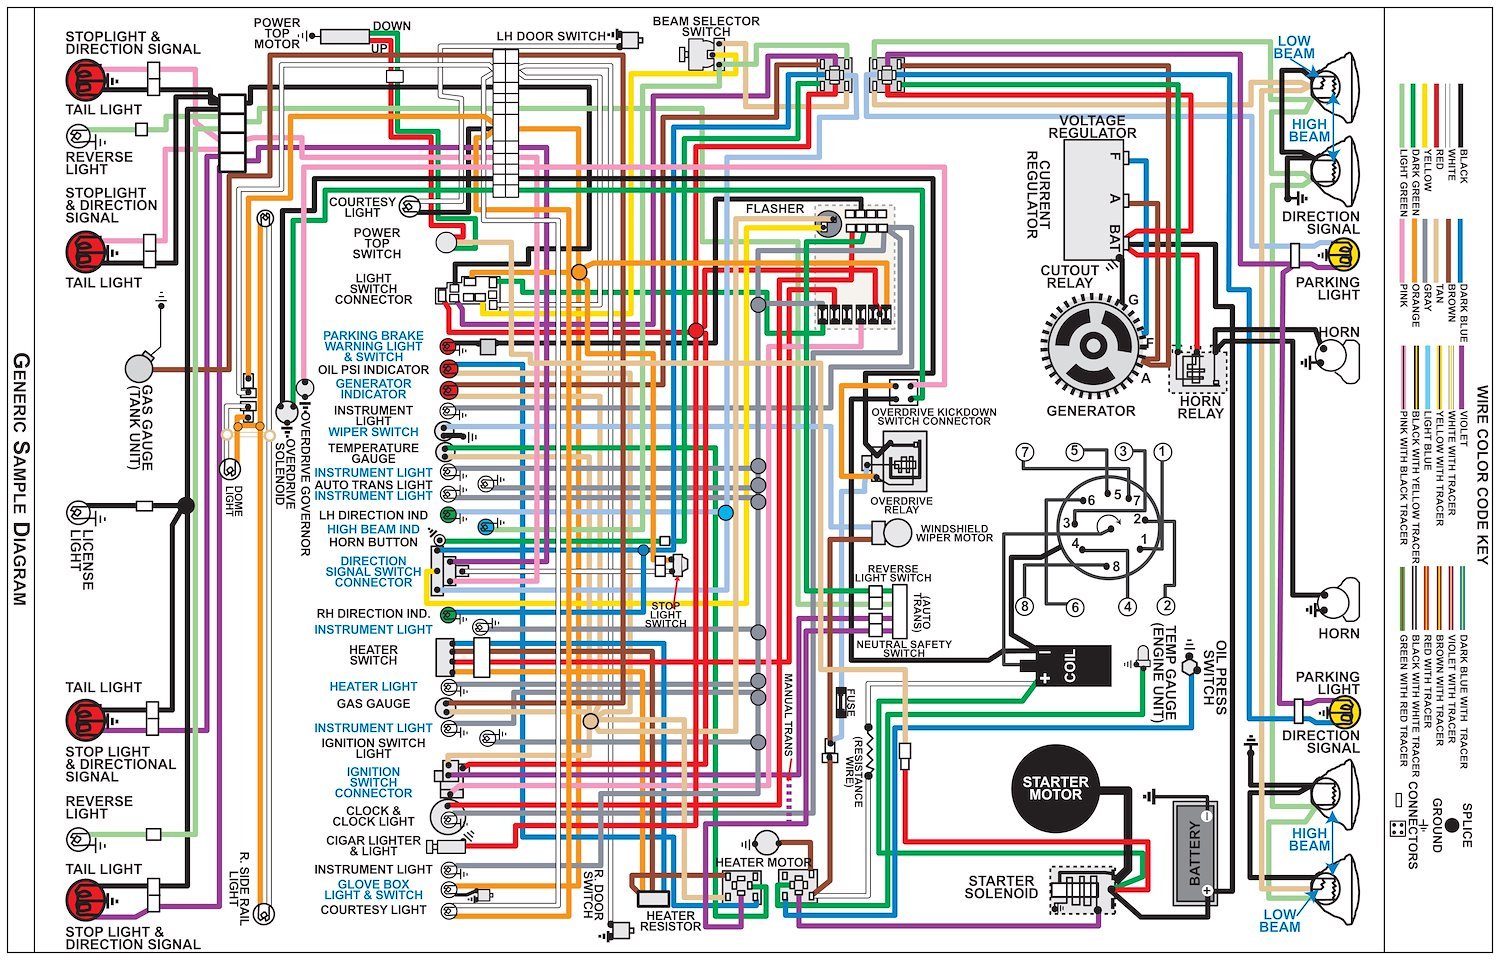 Wiring Diagram for 1963 Ford Falcon, 11 in